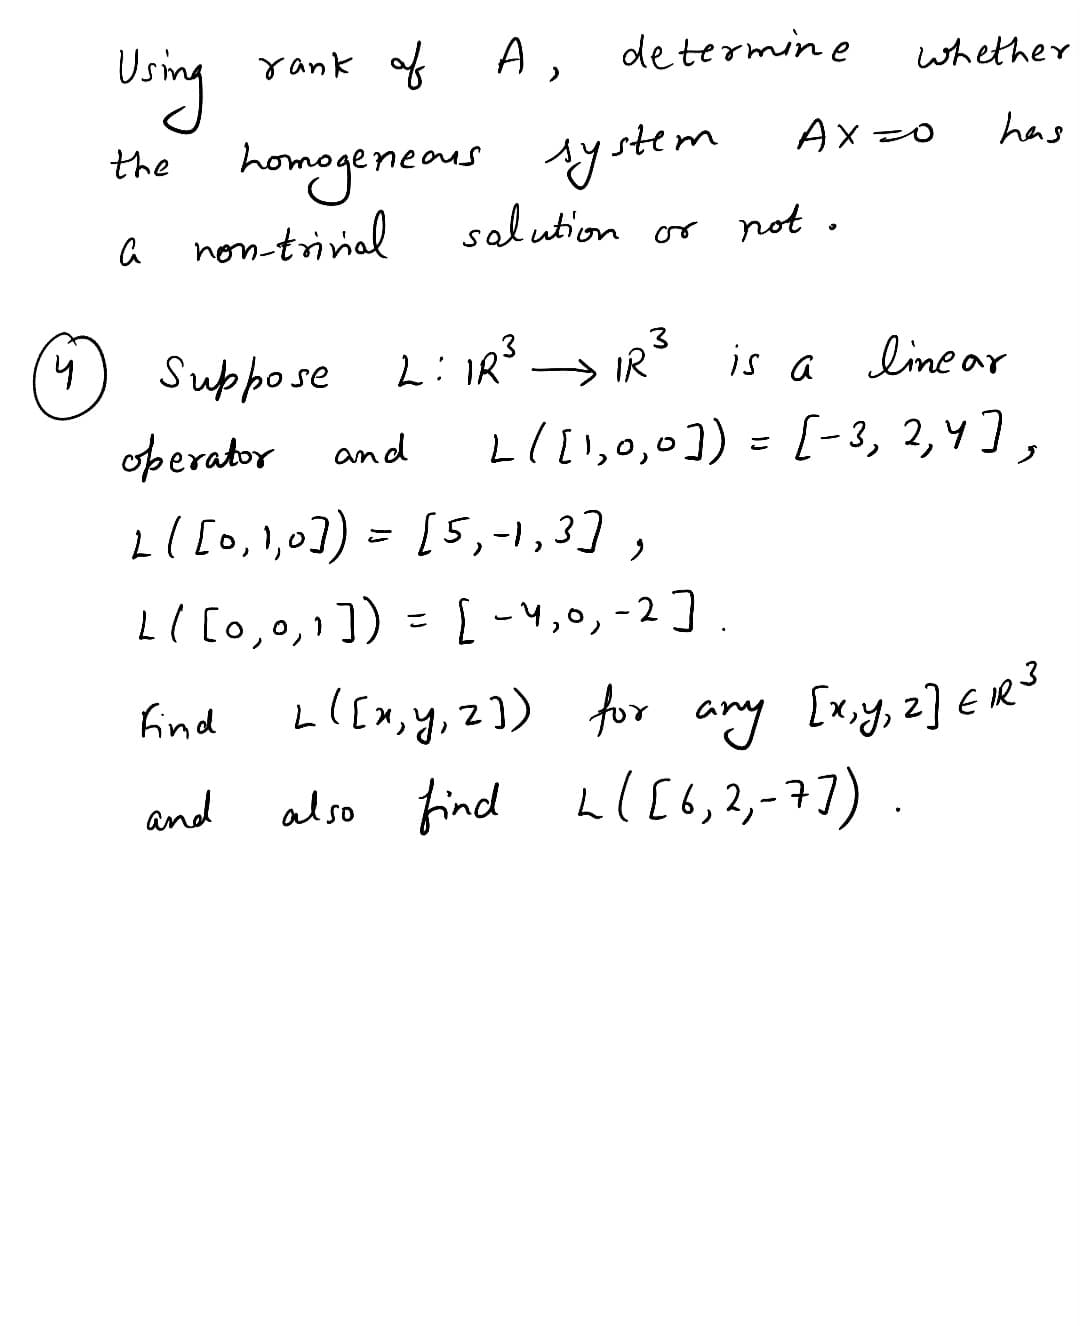 determine
Using
rank of A,
the homogeneous system
a non-trivial
salution
or not.
Ax=o
whether
has
(4) Suppose L: IR³ → IR³ is a
operator and
L ( [0,1,0]) = [5,-1,3],
L( [0,0,1]) = [-4, 0, -2].
find
and
is a linear
L ( [1,0,0]) = [-3, 2, 4],
L[[x, y, 2]) for any [x,y, 2] E1³
also find L([6,2₁-7]).